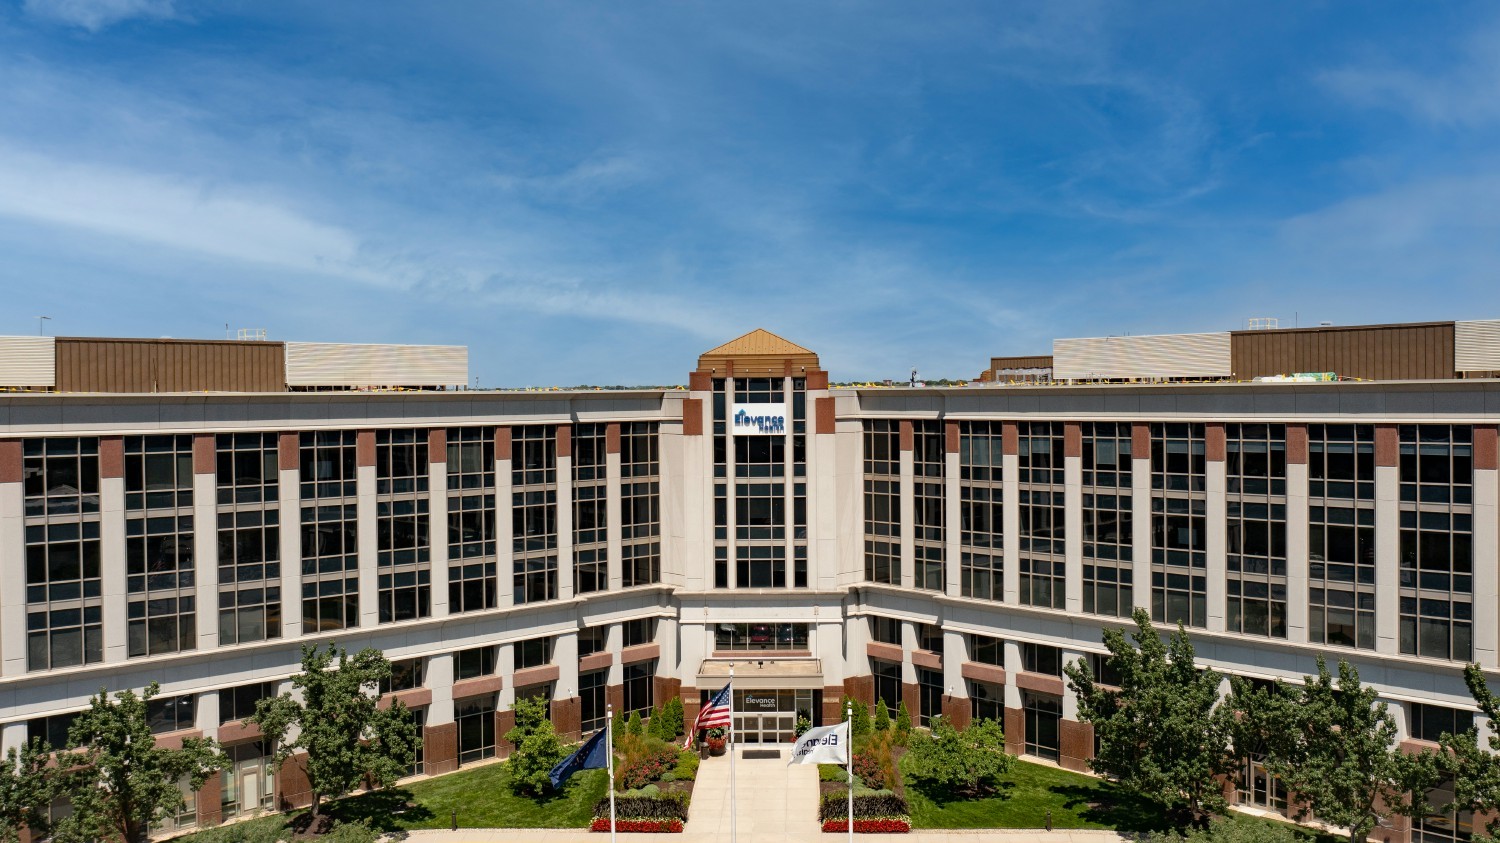 Elevance Health’s corporate headquarters in Indianapolis, IN